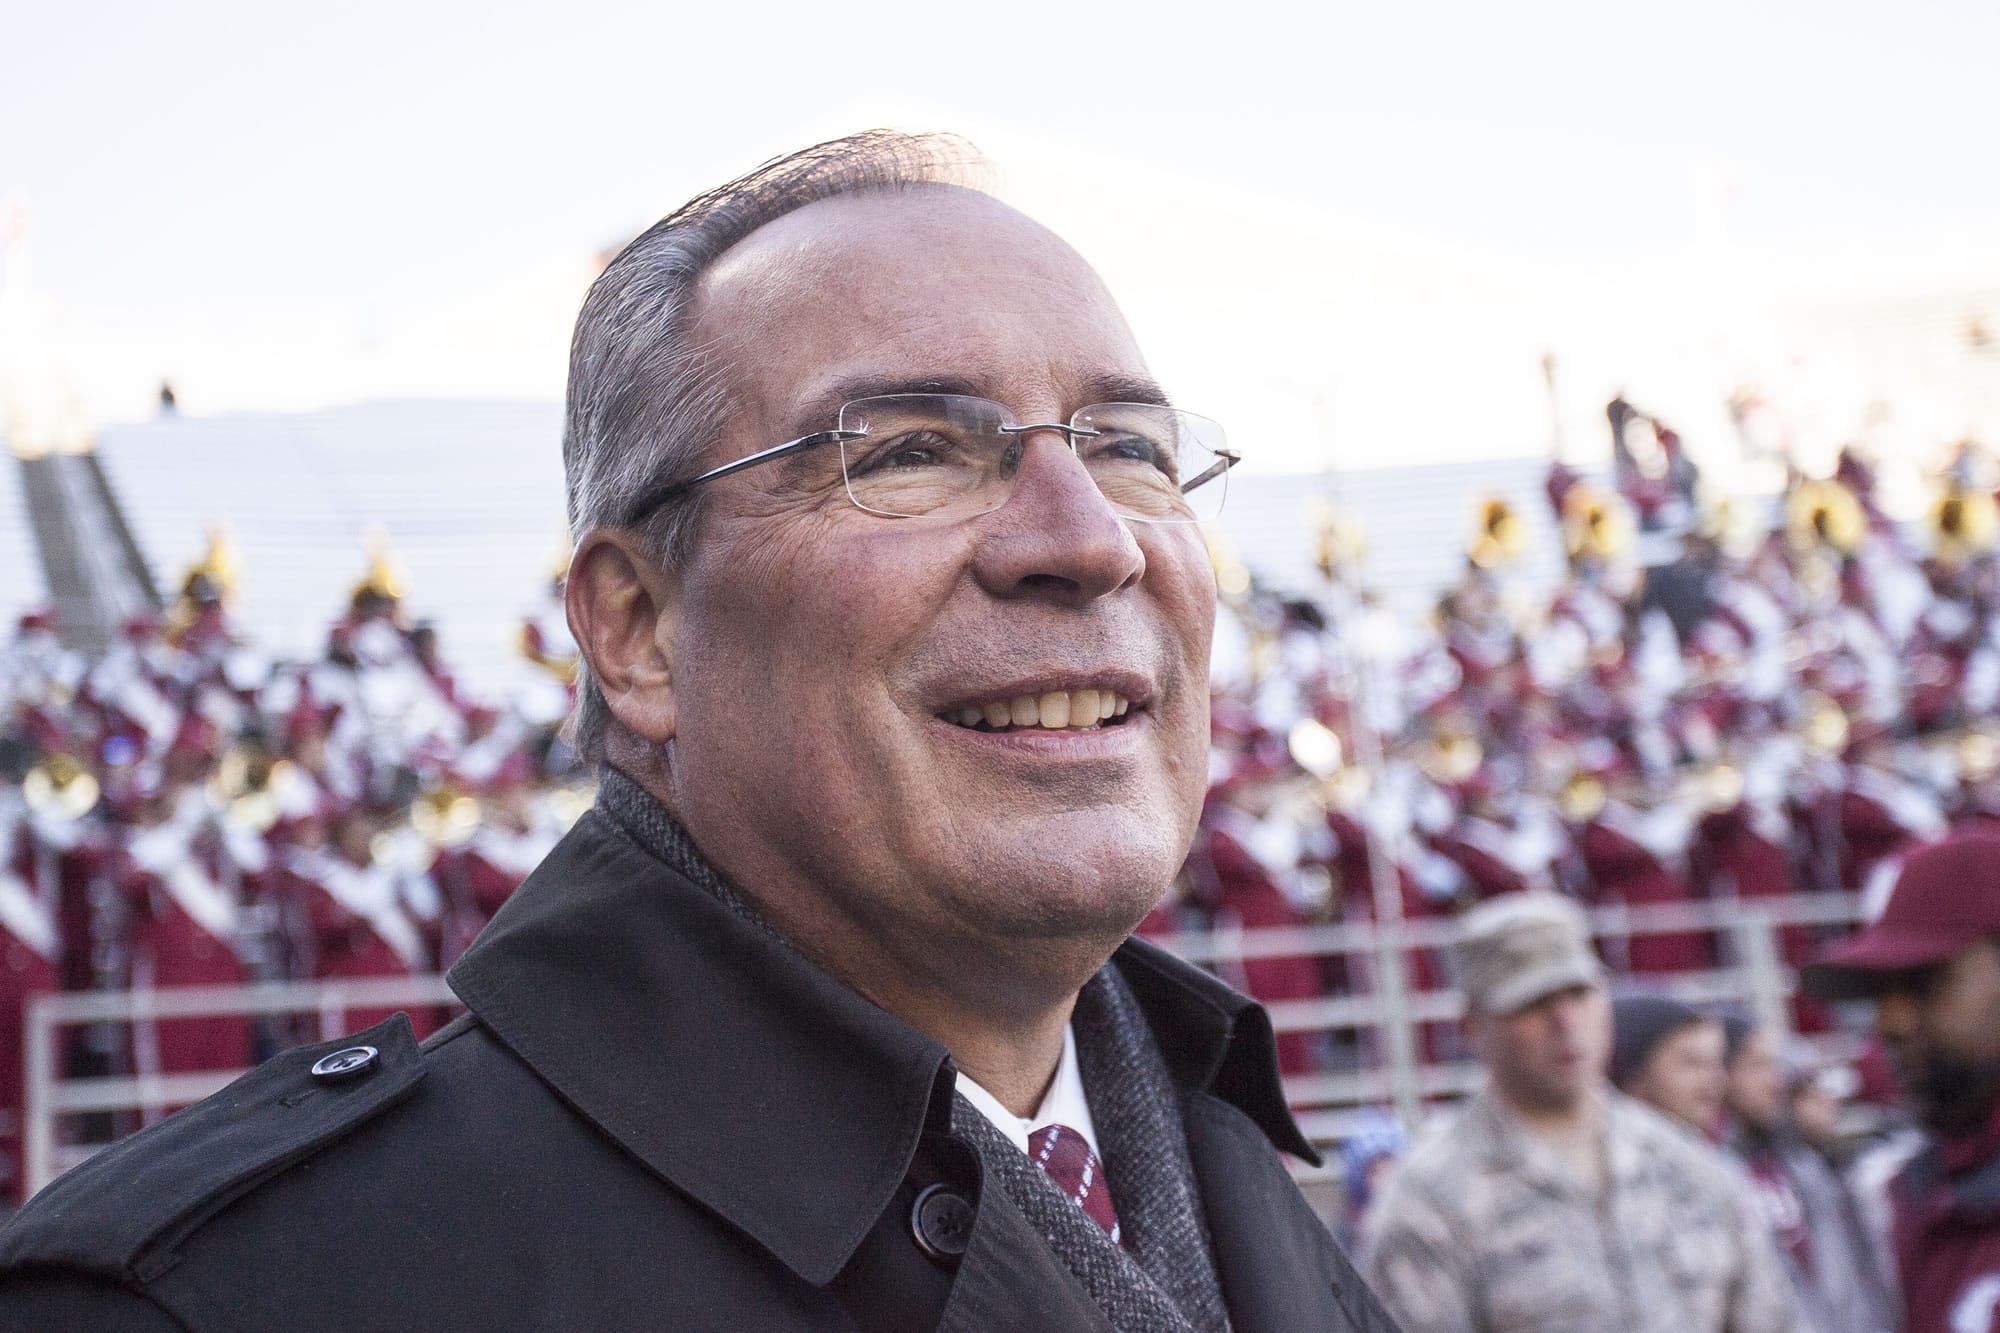 Washington State athletic director Bill Moos is leaving Pullman for Lincoln, Neb., as he was named on Sunday, Oct. 15, 2017, to be the next athletic director at Nebraska.